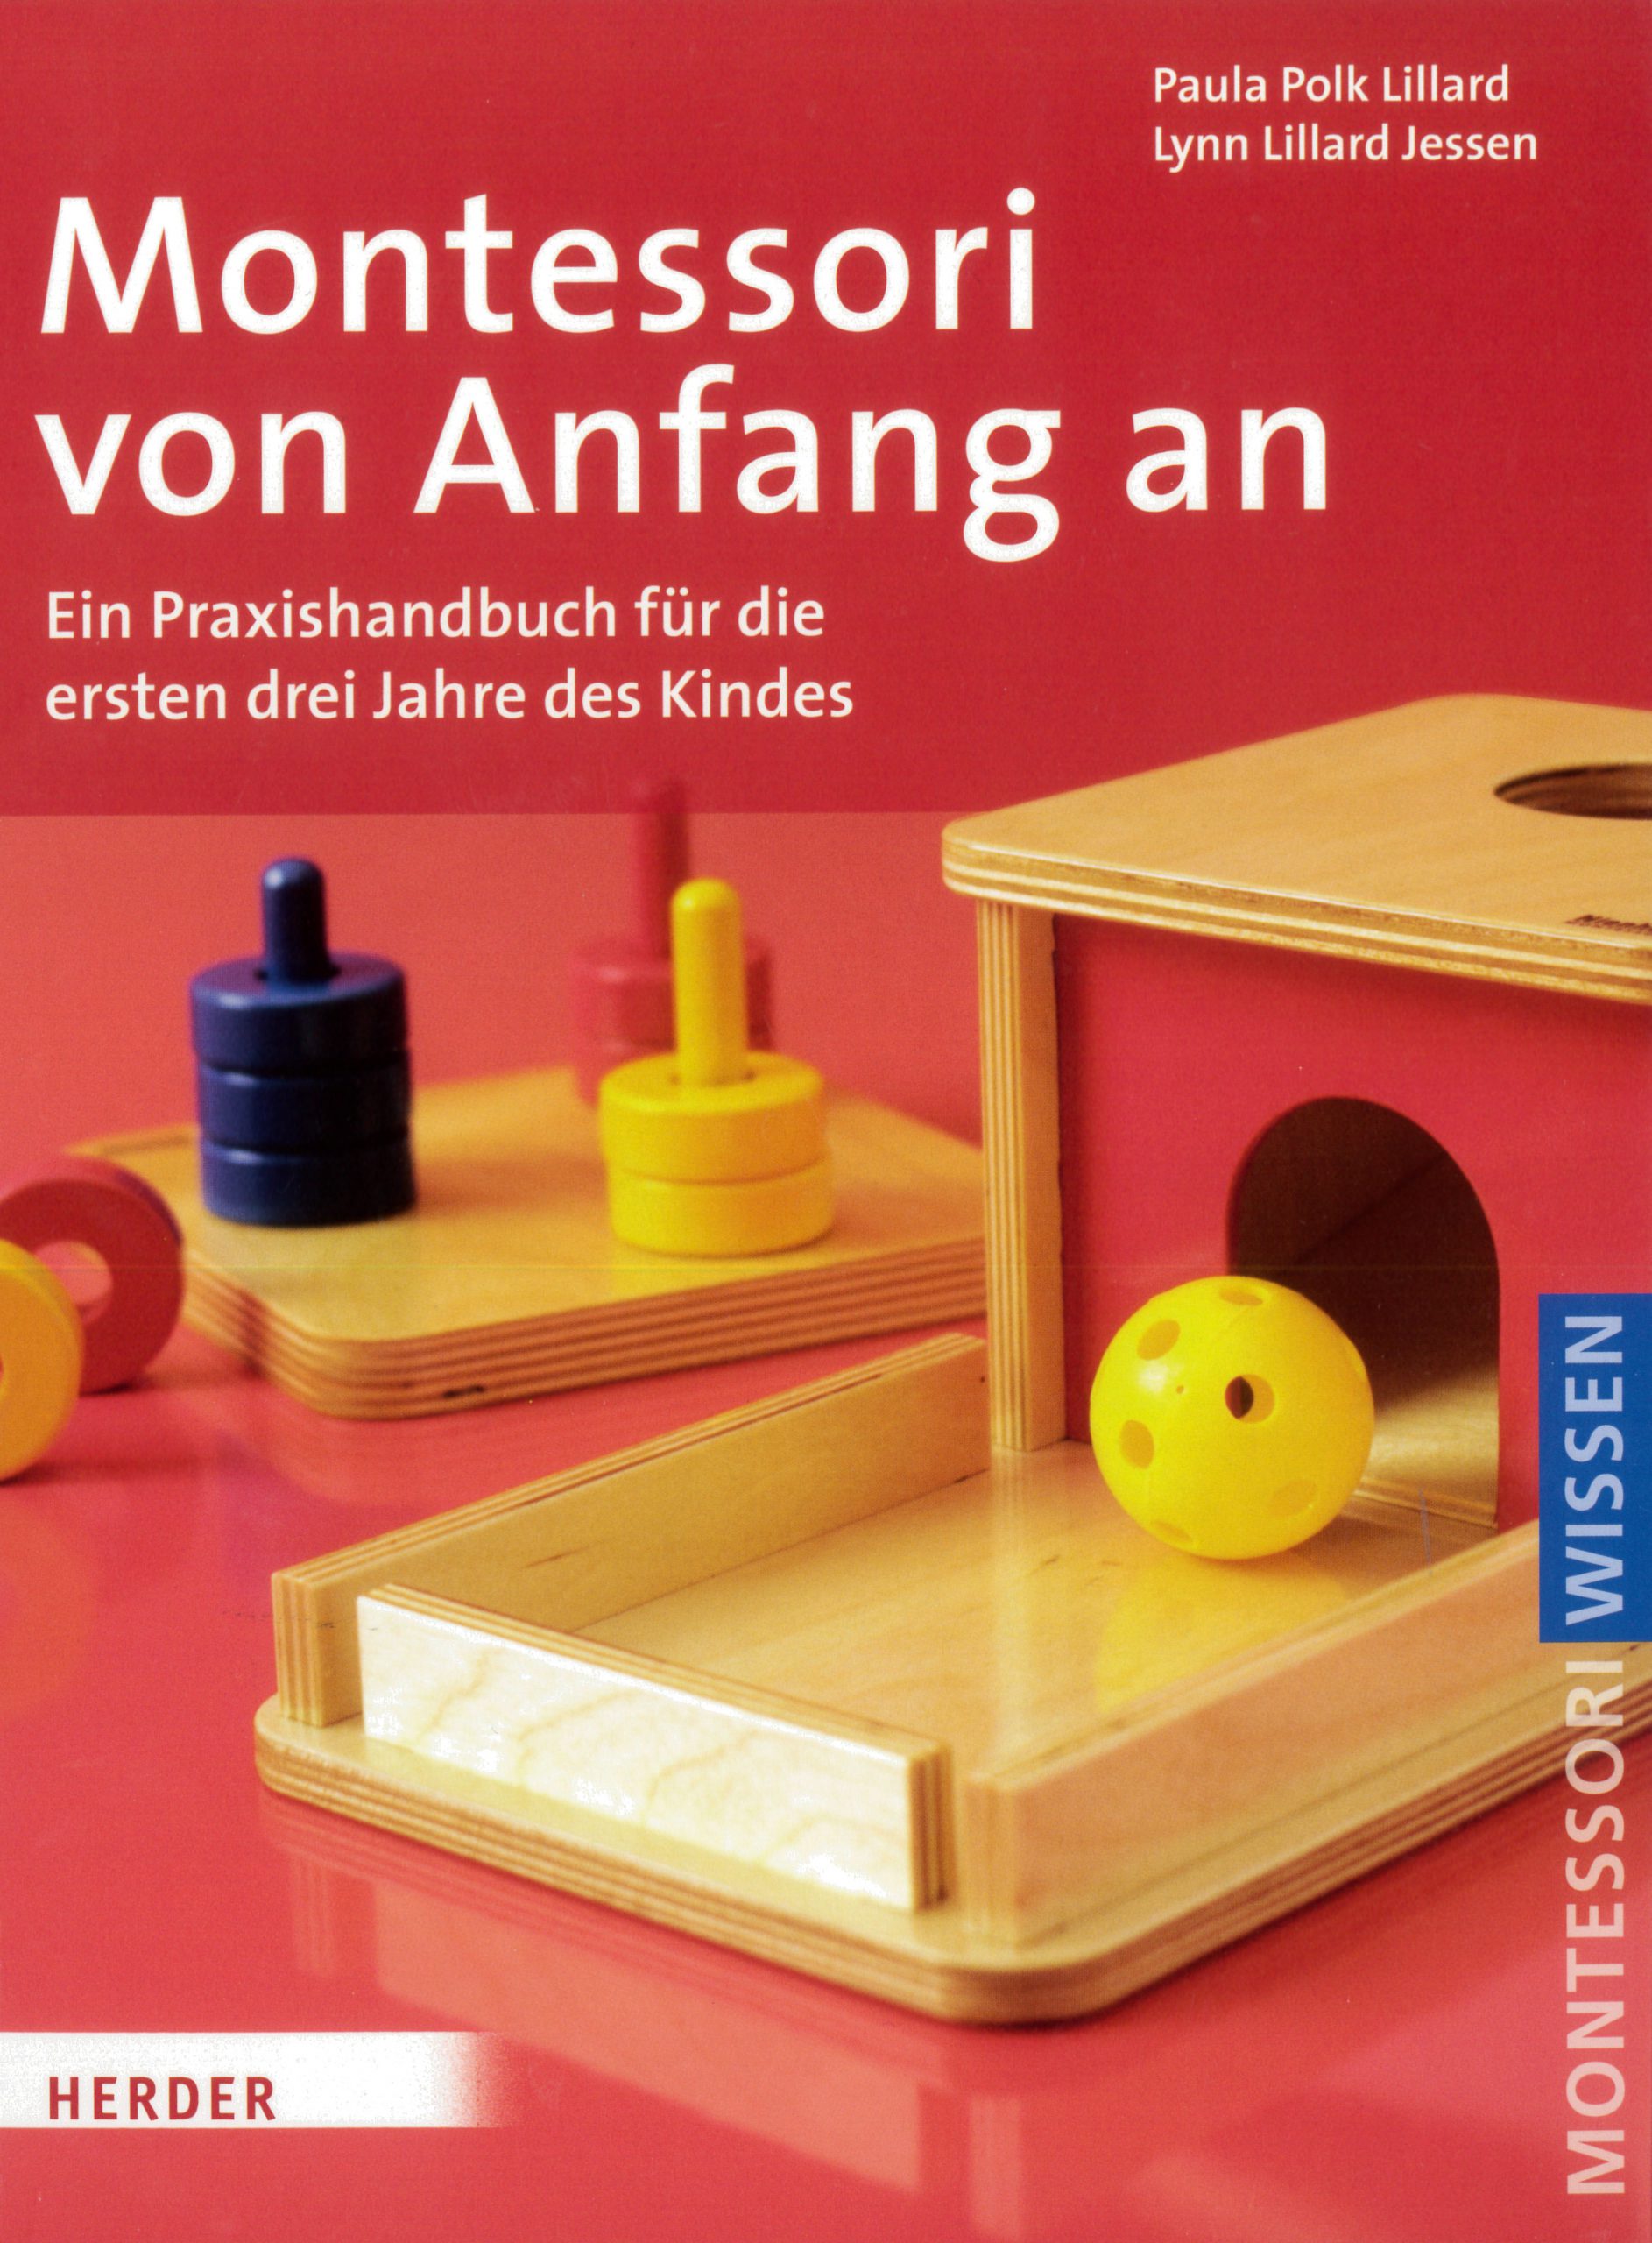 Montessori von Anfang an scaled 1